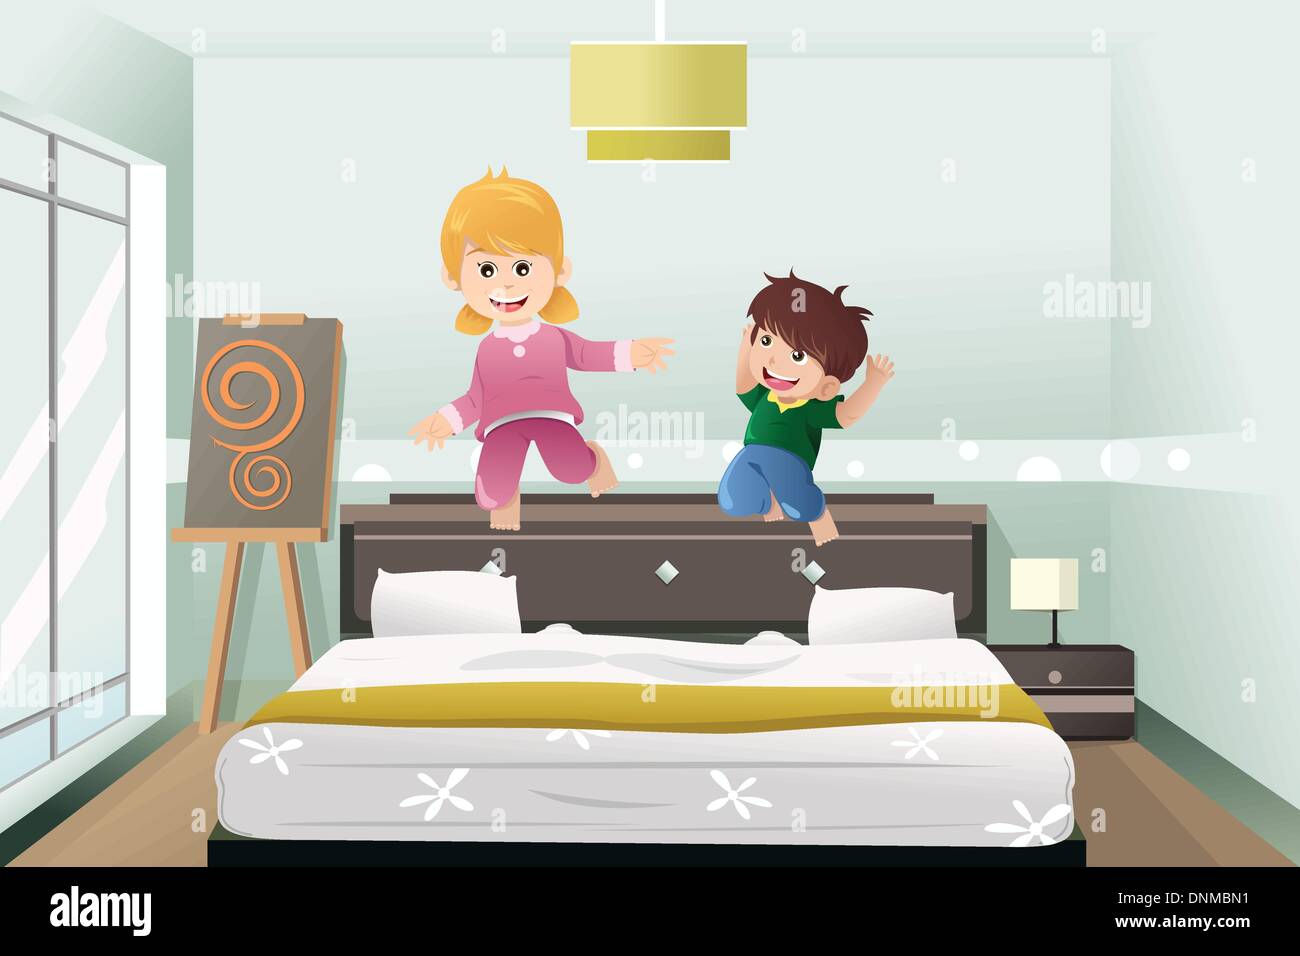 A vector illustration of active kids jumping on the bed Stock Vector